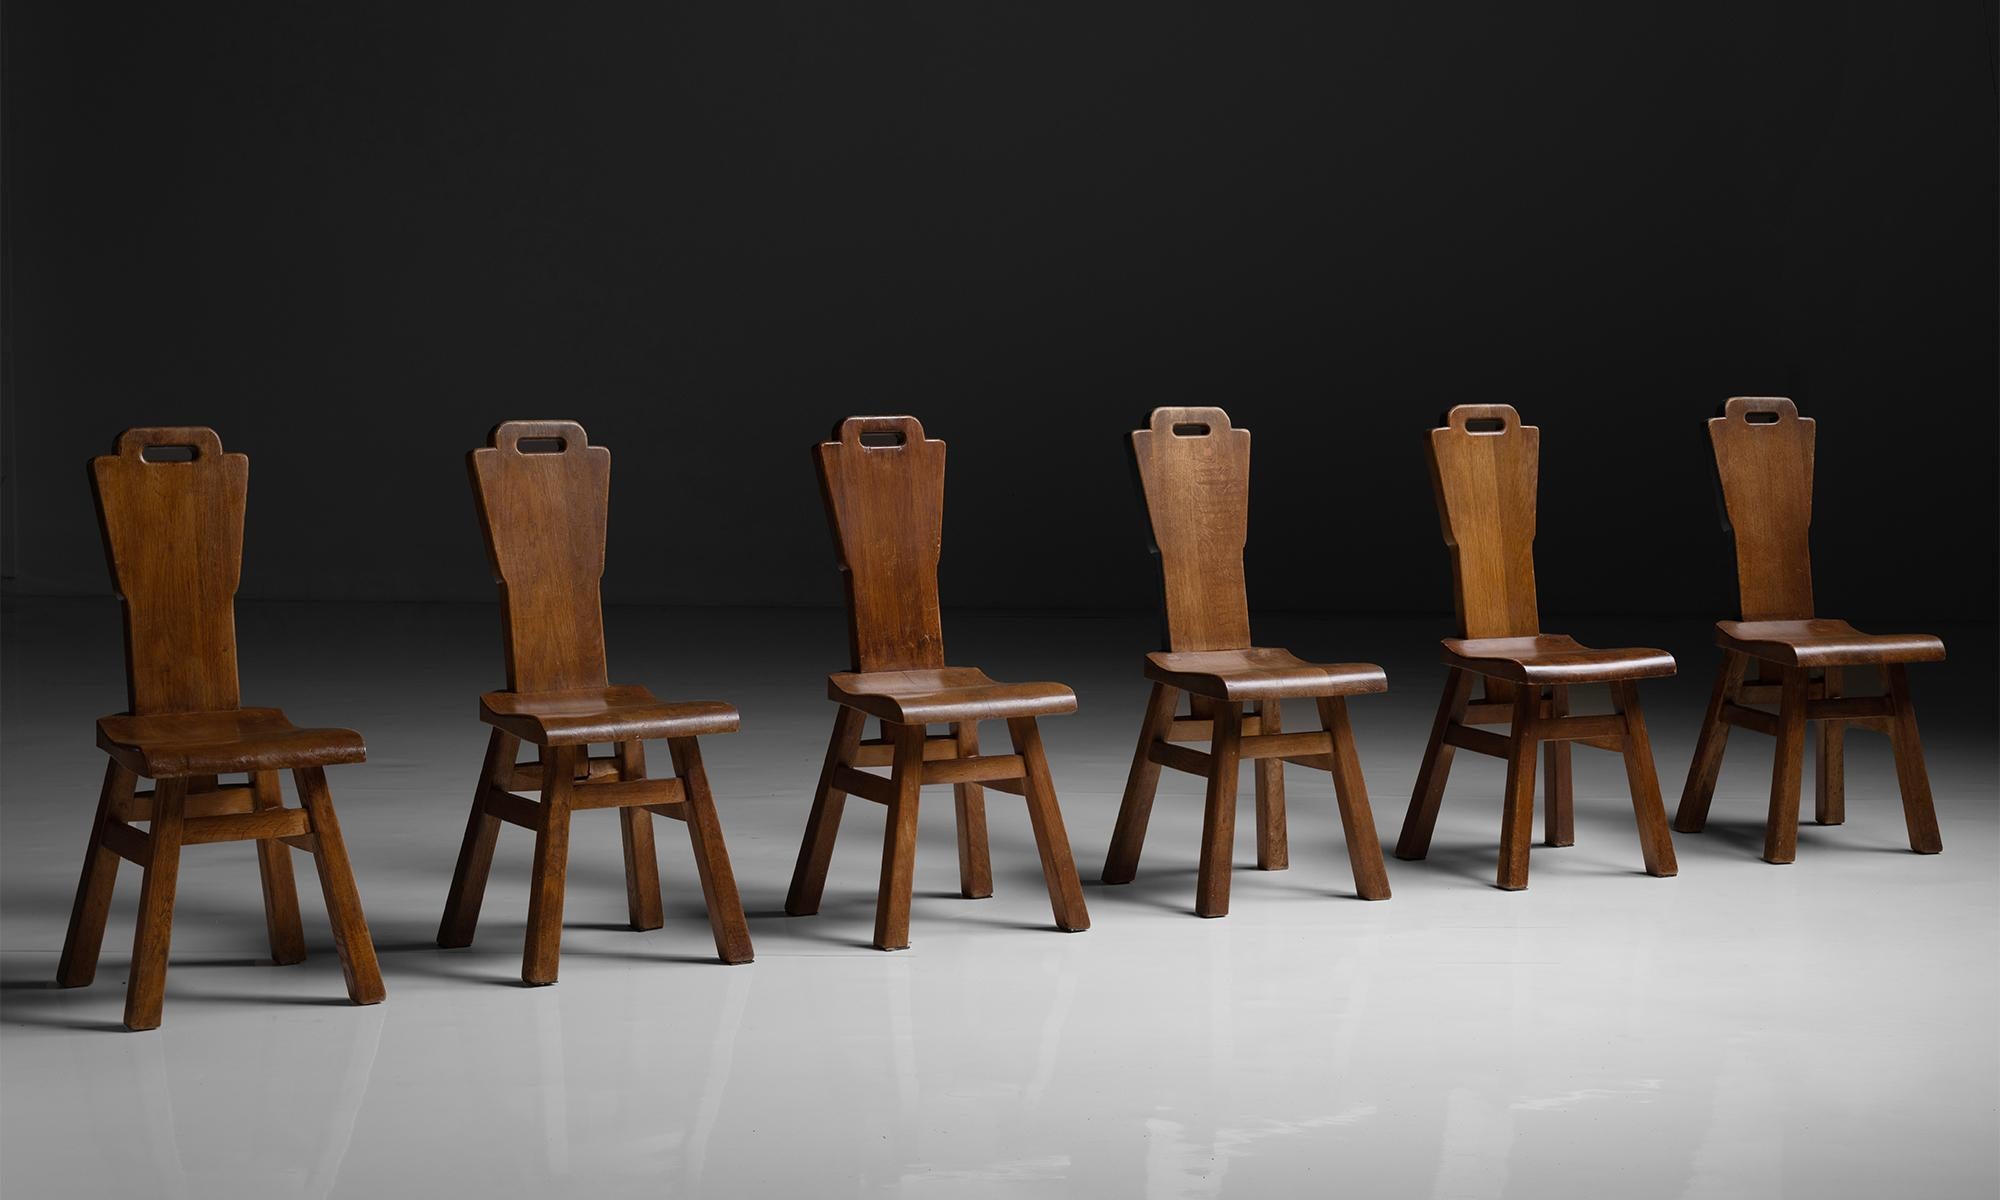 Set of (6) Monastery Chairs, Netherlands, circa 1900

Oak brutalist dining chairs from a Monastery in The Hague.

Measures 15”w x 17.5”d x 37.5”h x 18.5” seat.